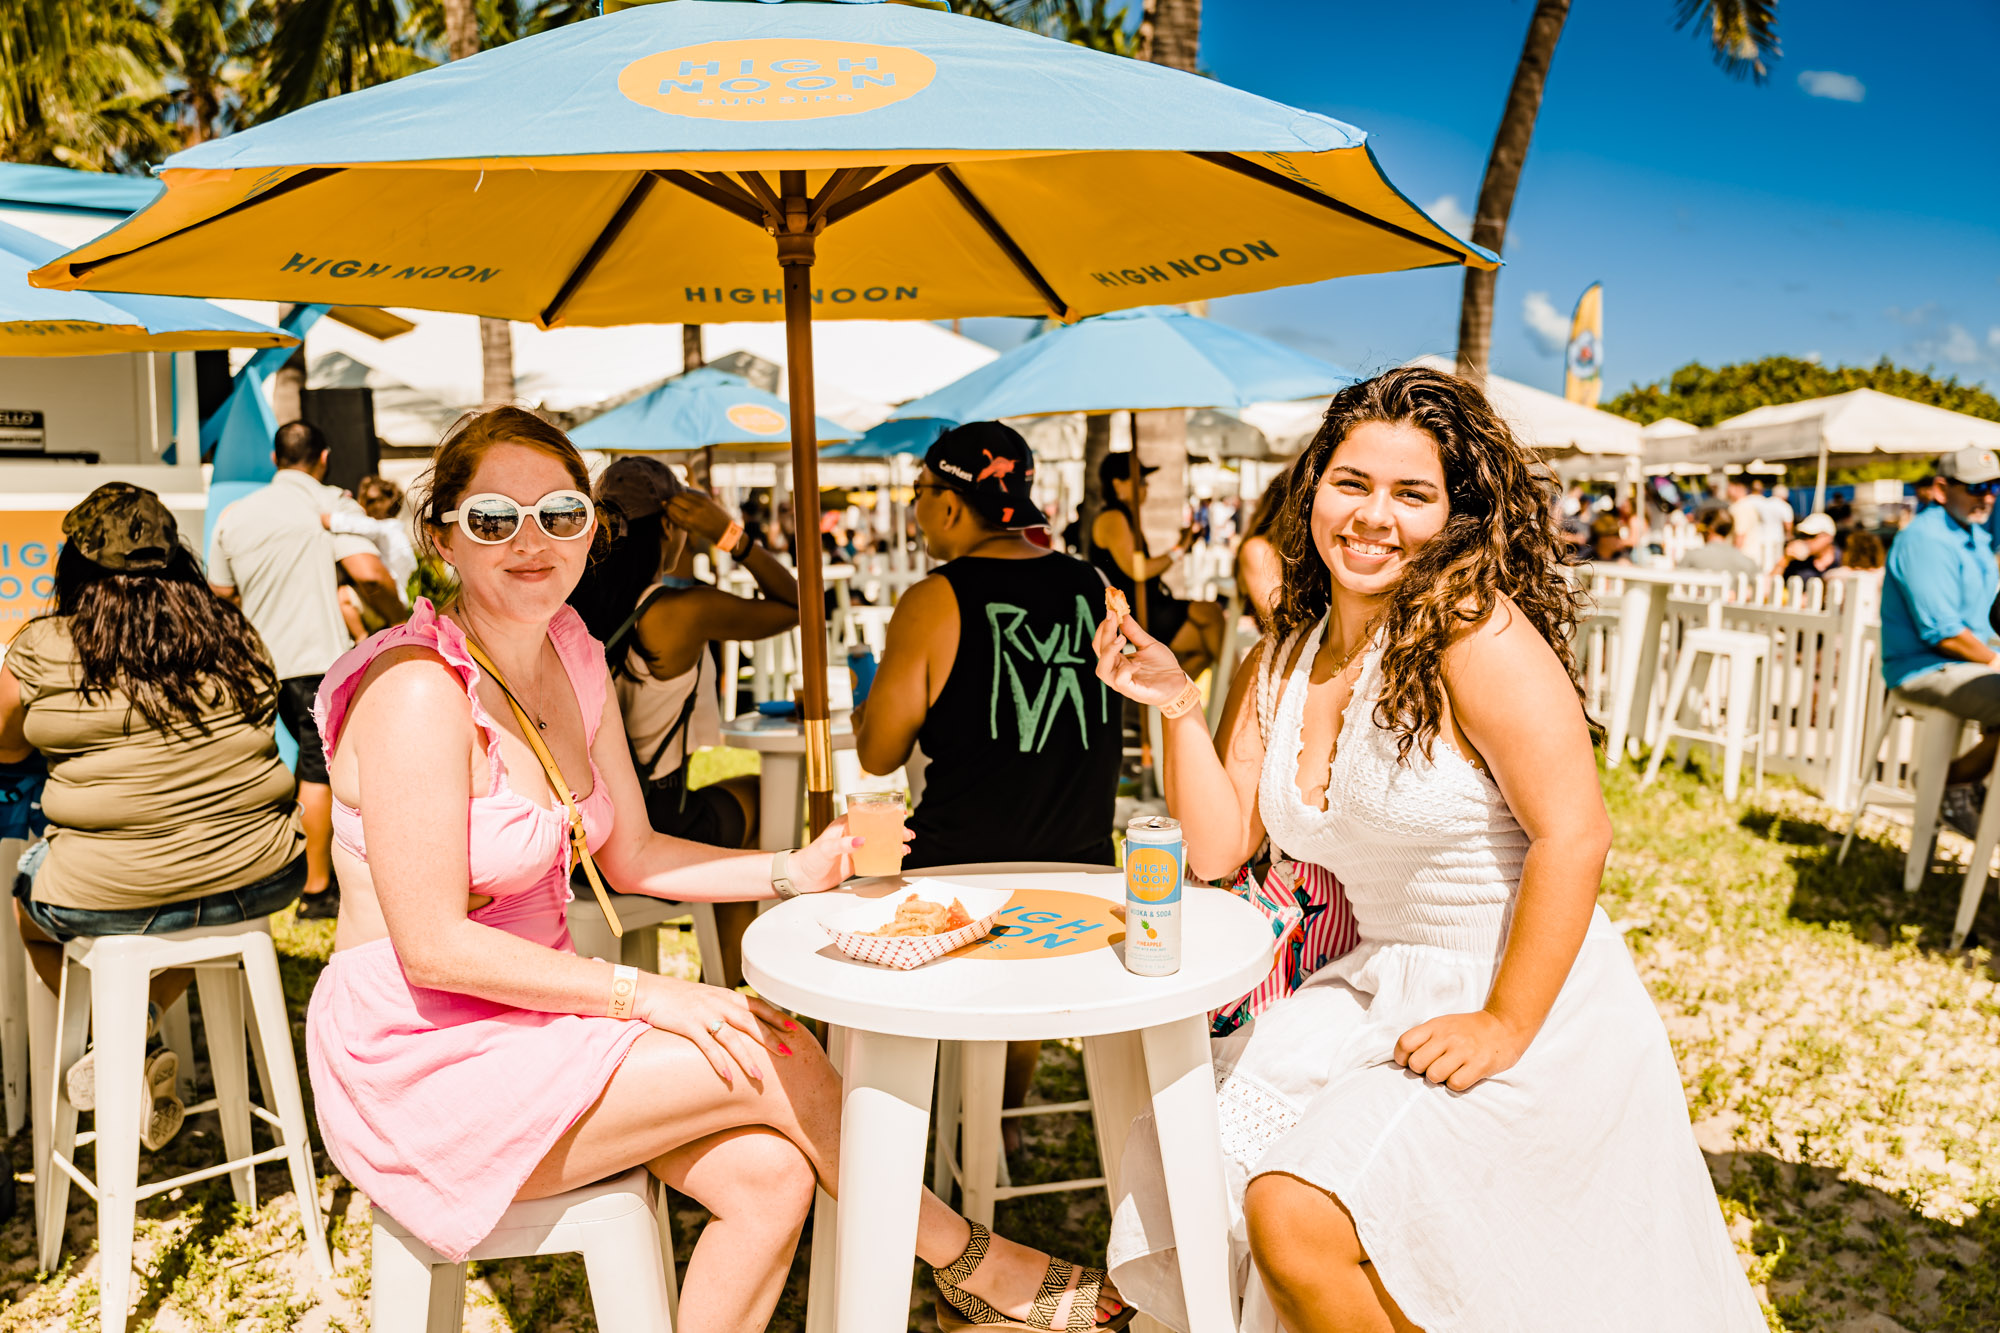 Exclusive experiences at South Beach Seafood Festival